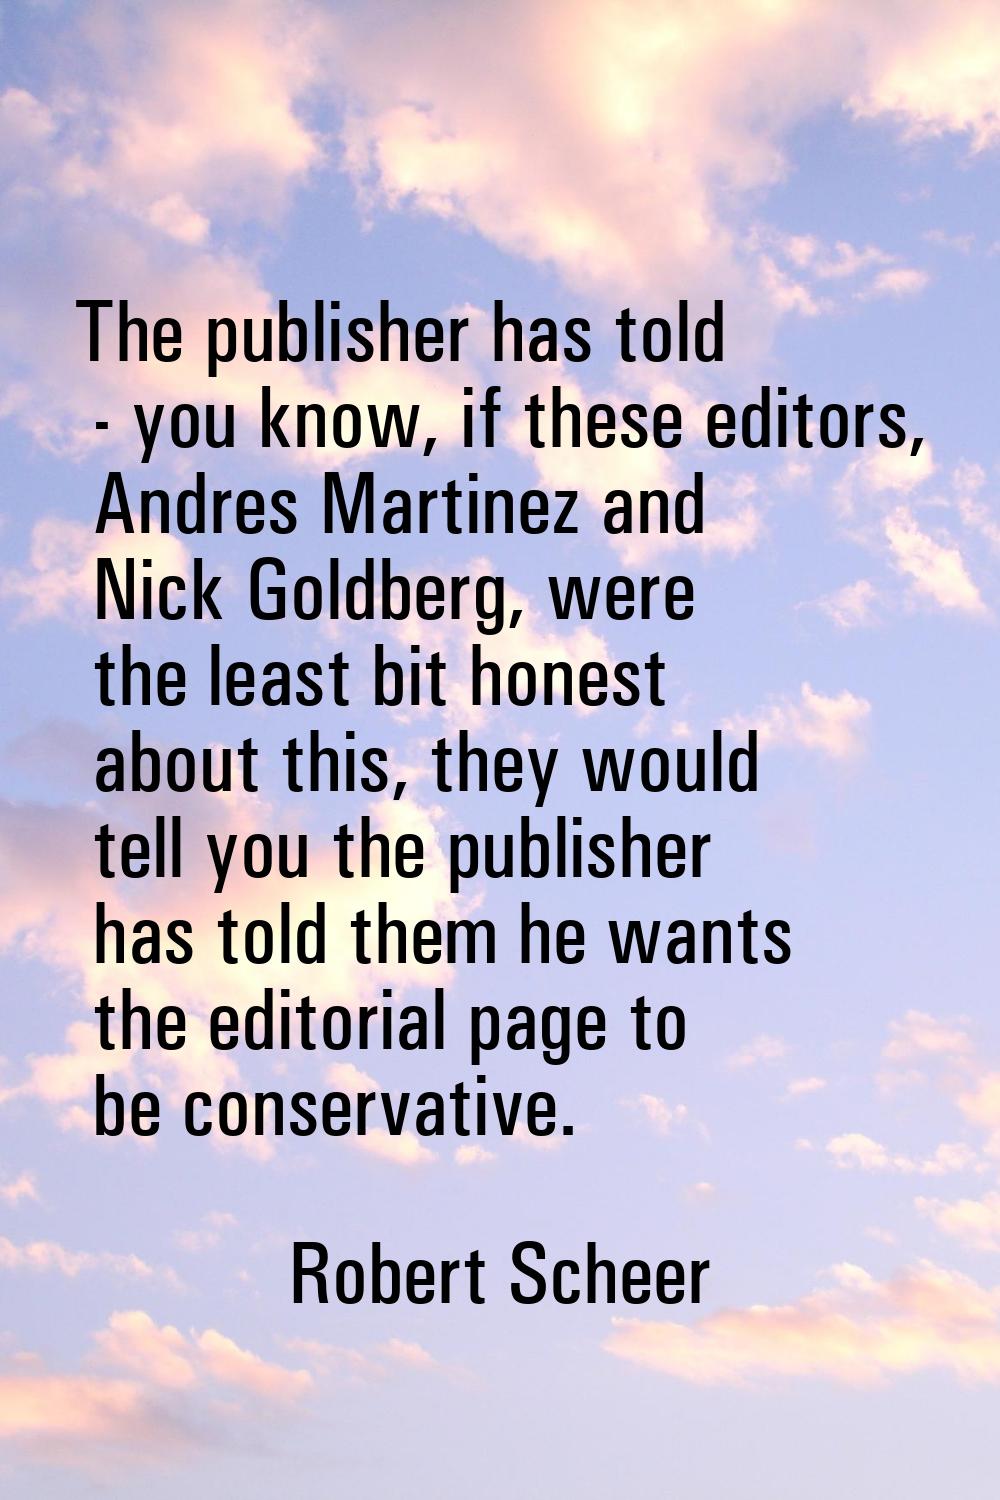 The publisher has told - you know, if these editors, Andres Martinez and Nick Goldberg, were the le